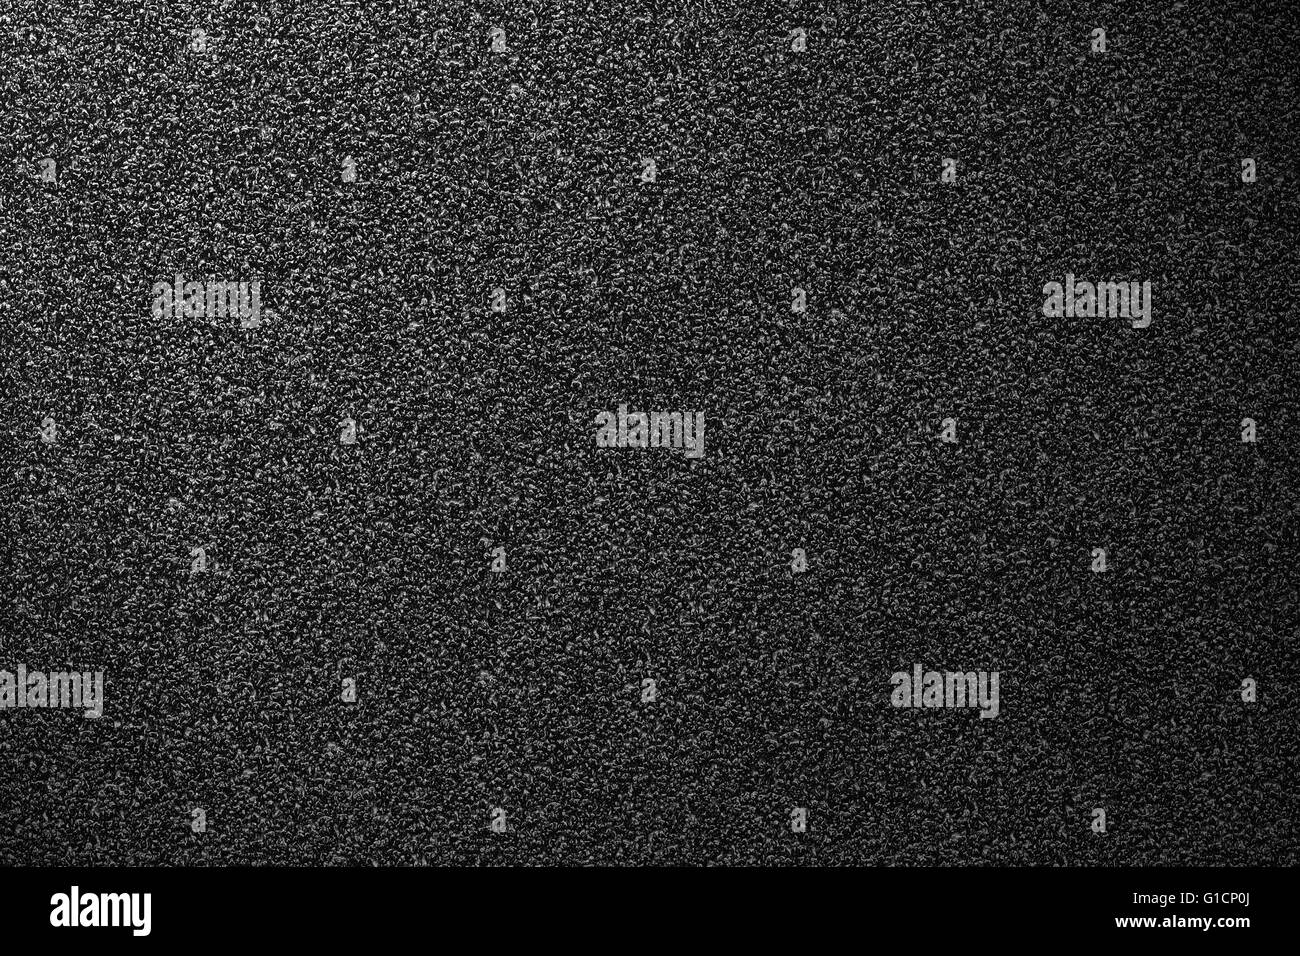 black abstract background or grain pattern texture Stock Photo